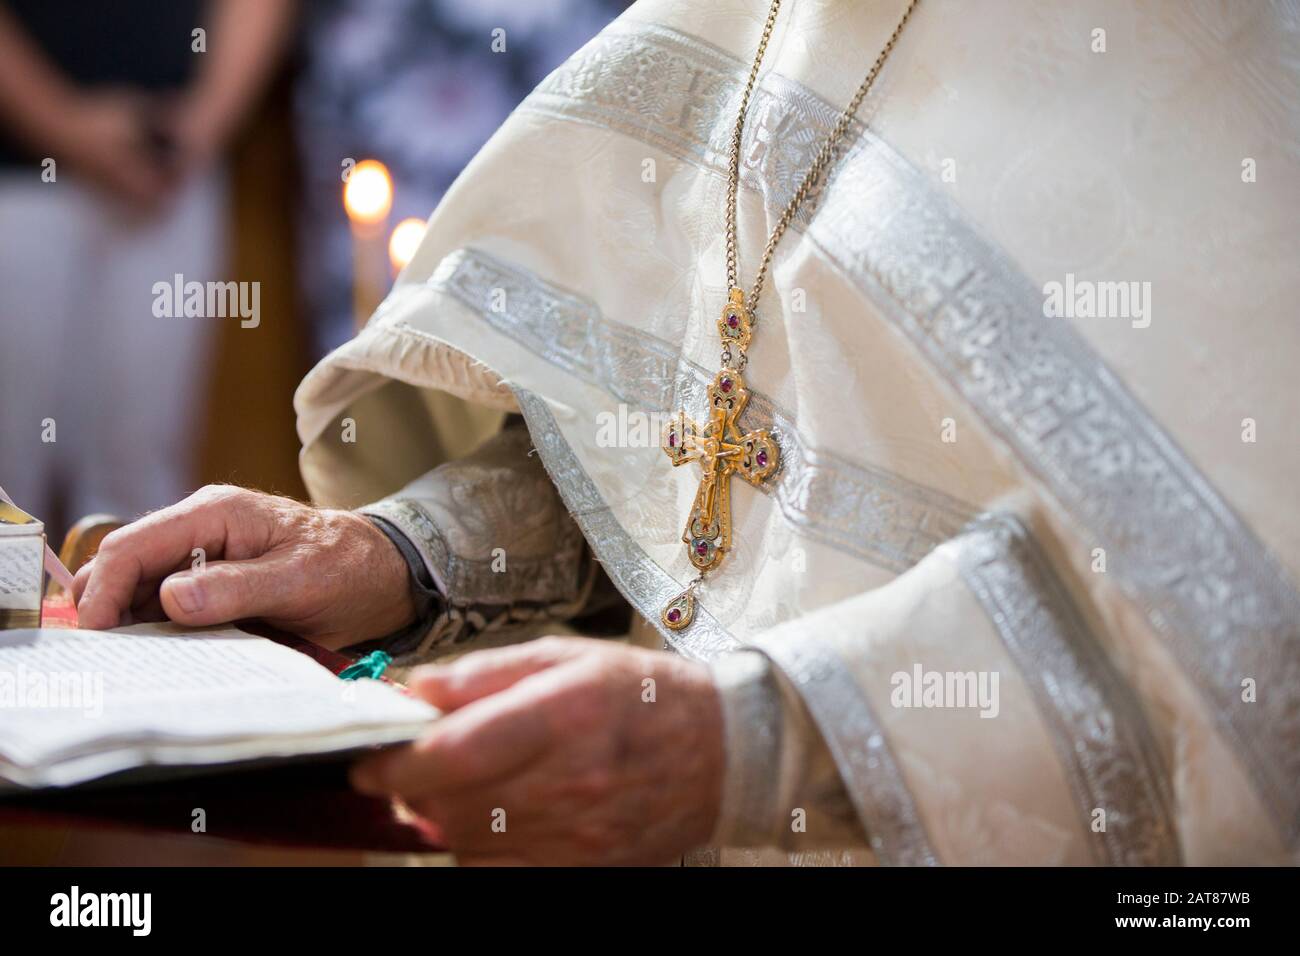 Orthodox religion. Hands of the priest against the background of the cross and candles. Stock Photo